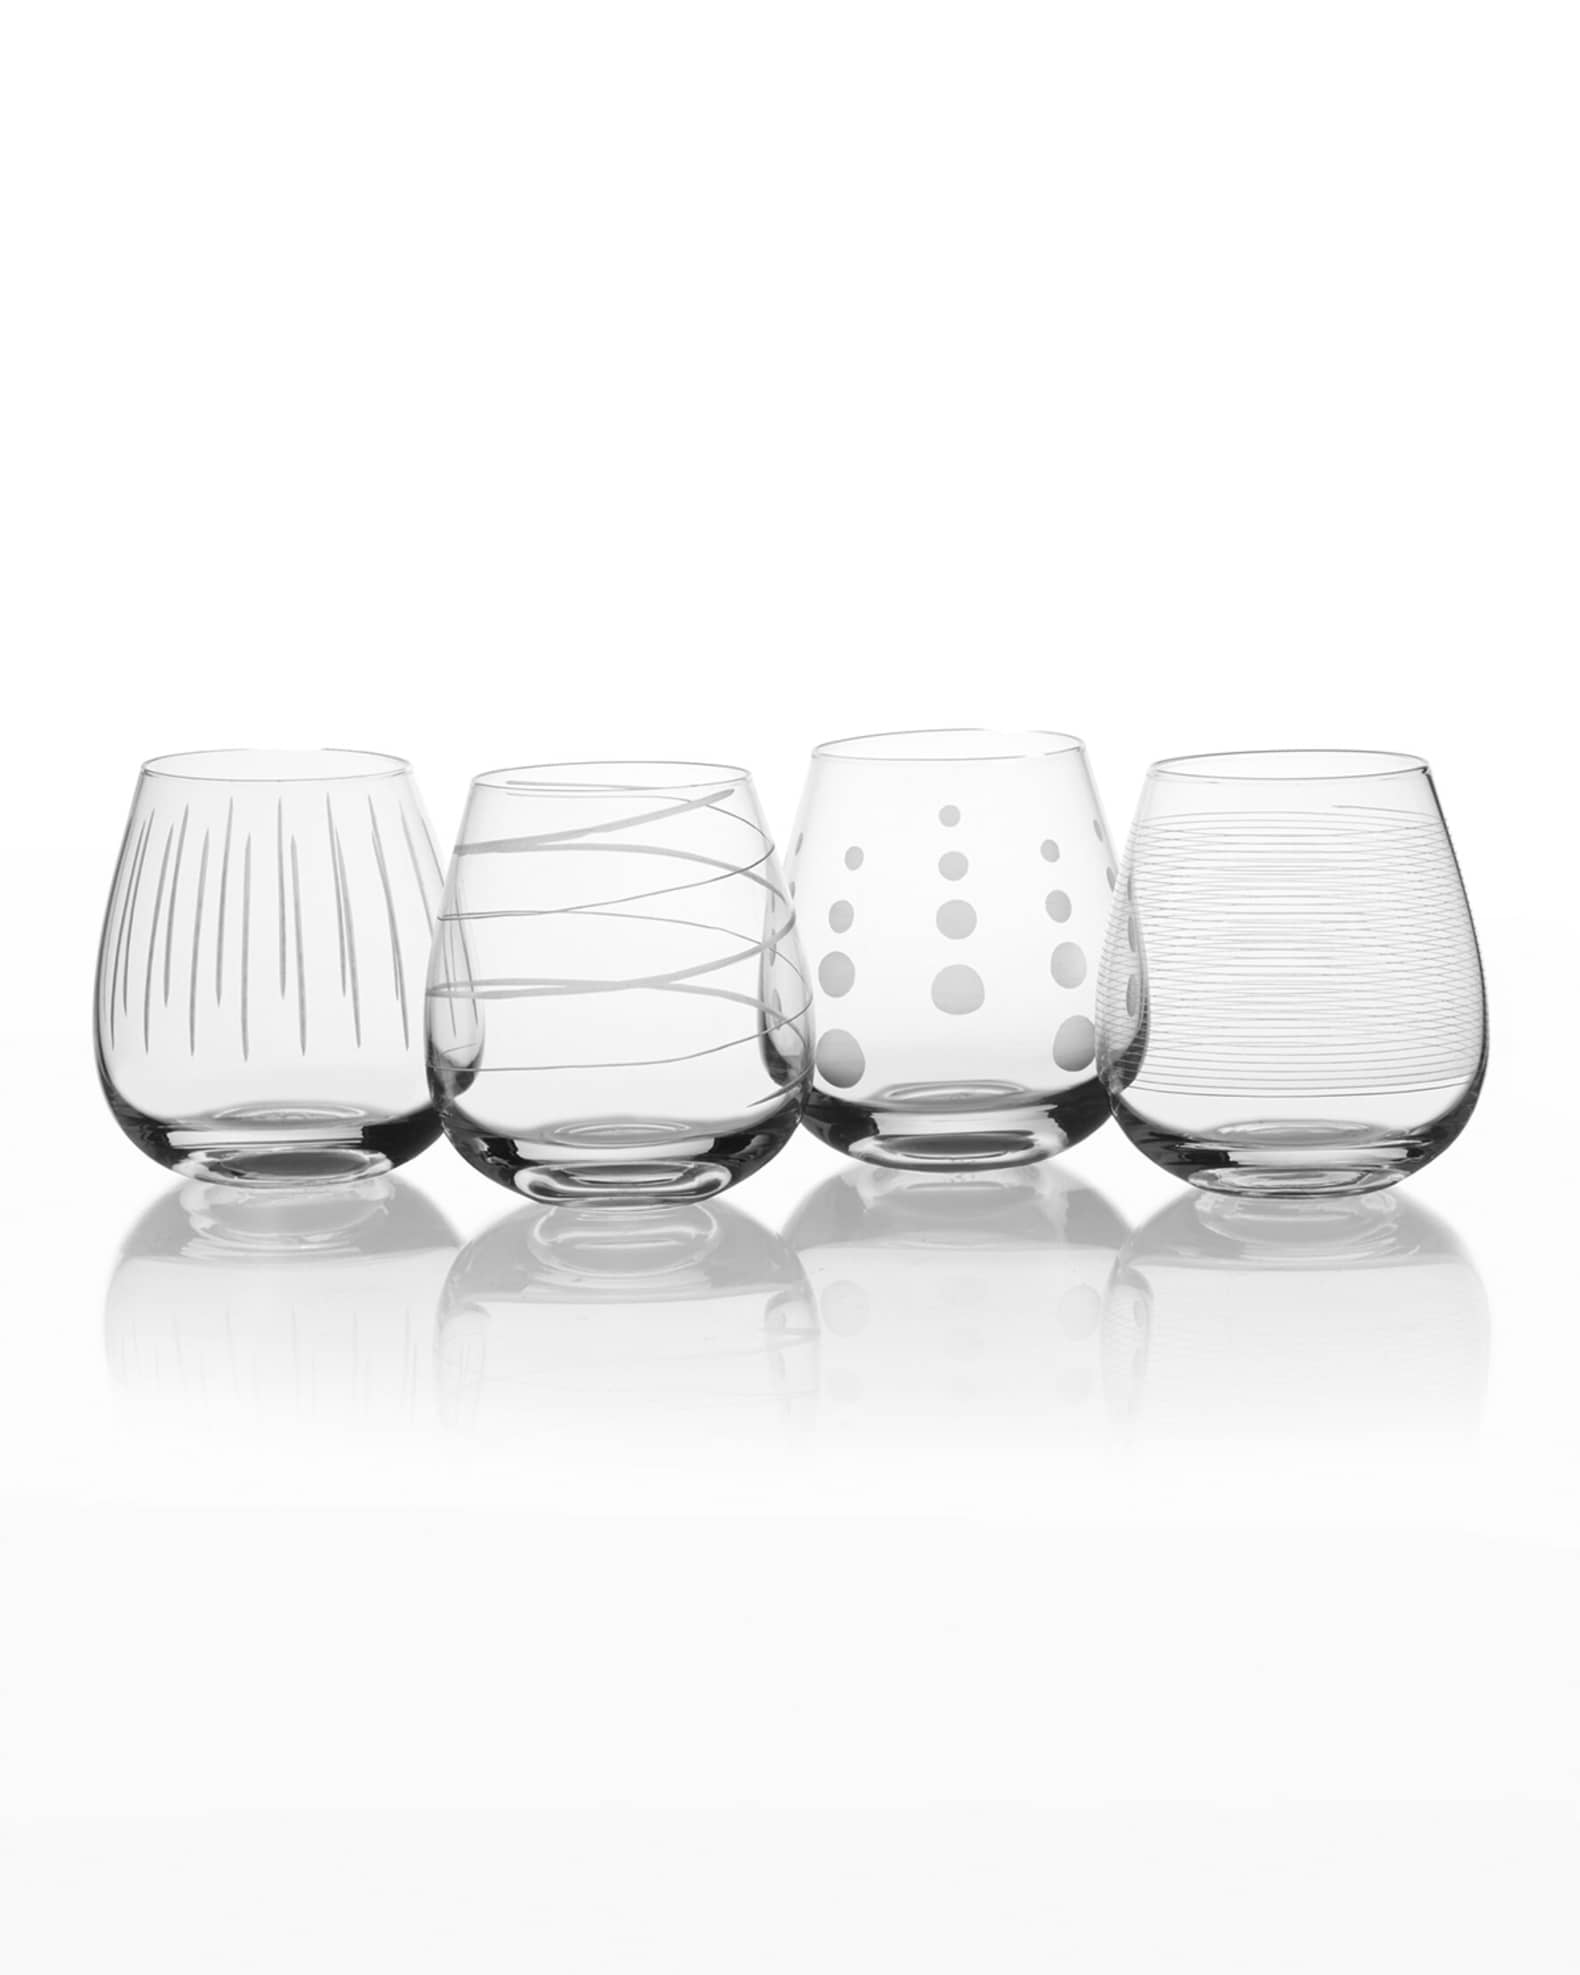 Mikasa Cheers Stemless Wine Glasses, Clear, 17 oz - 4 count